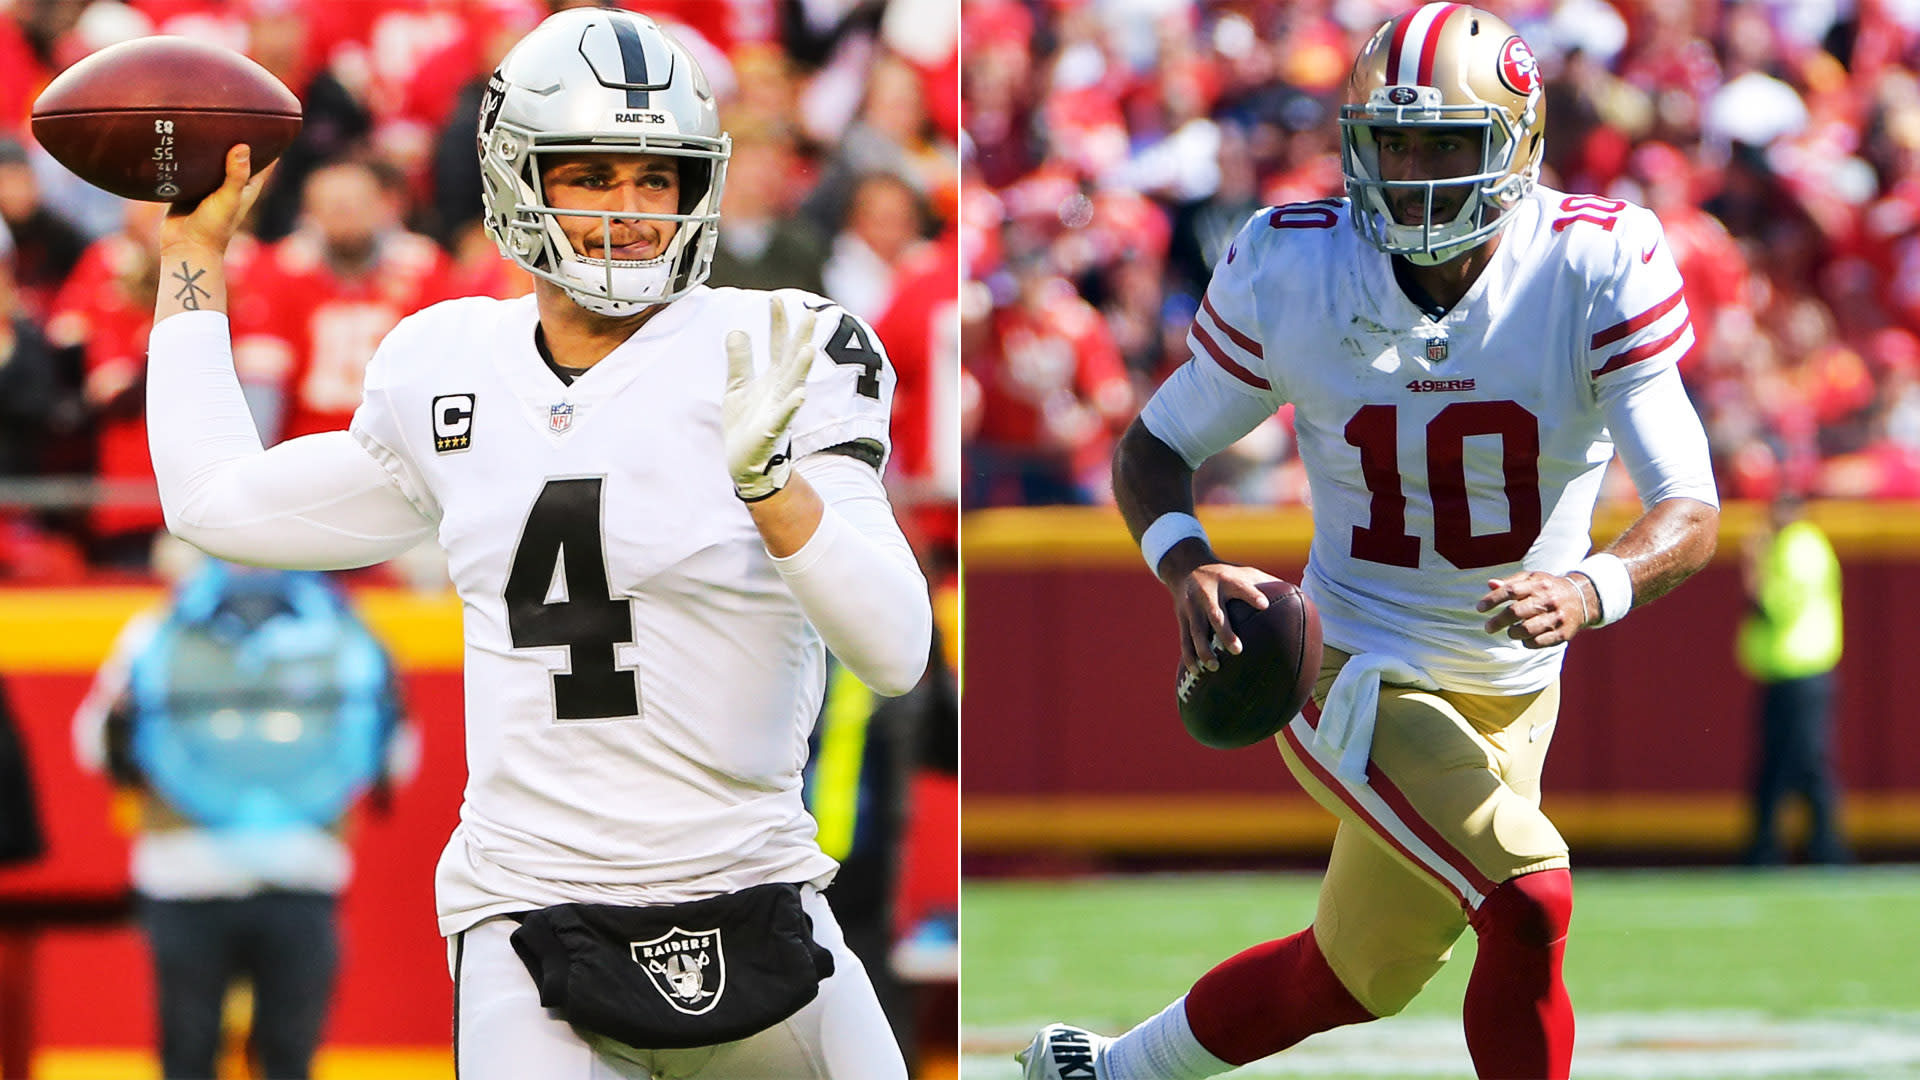 NFL schedule 2019: 49ers, Raiders' game dates to be released Wednesday